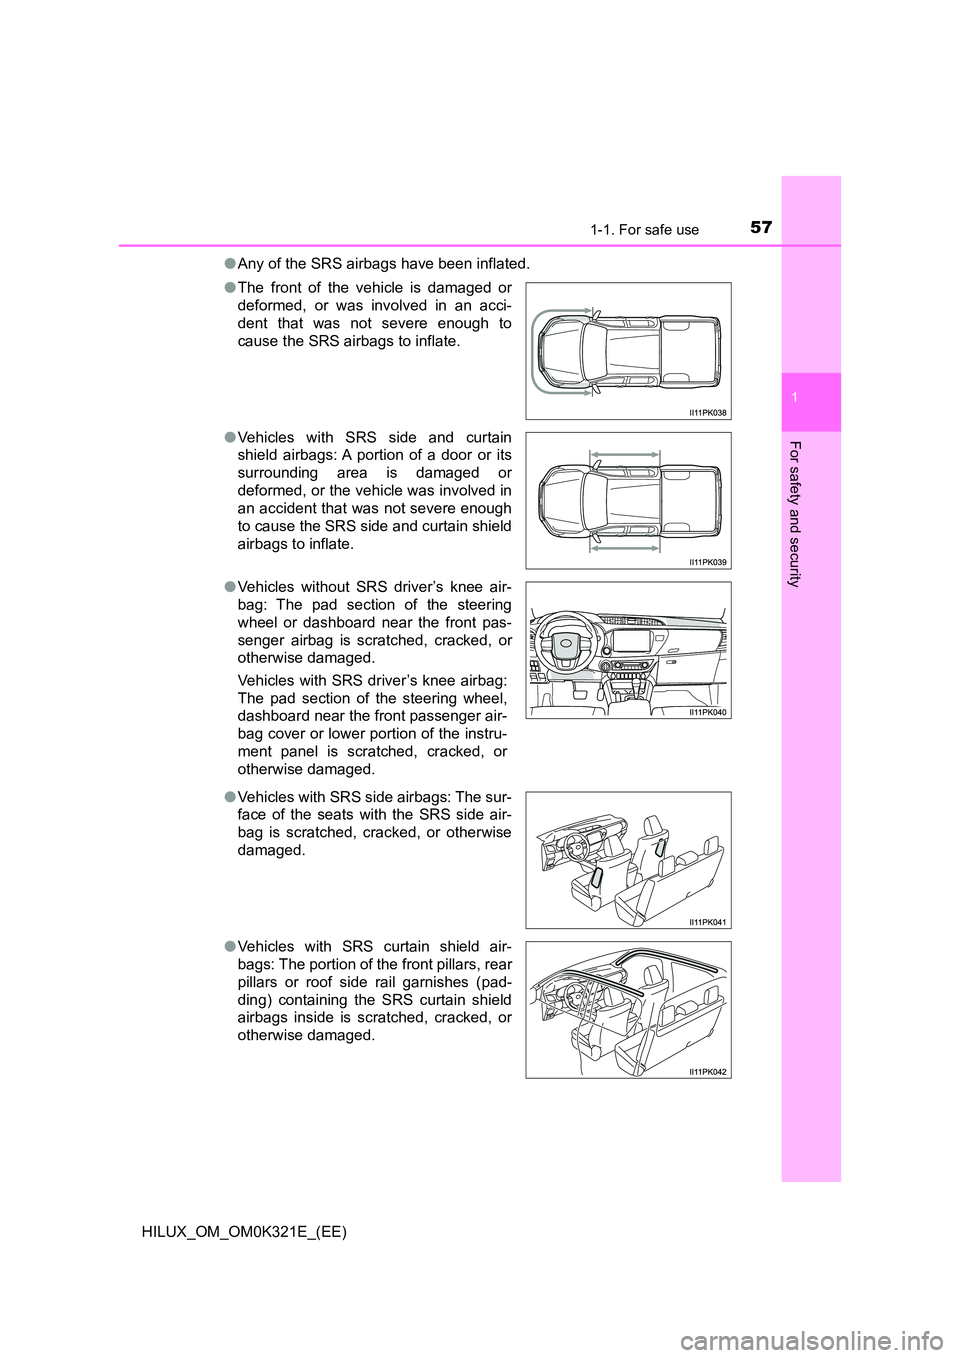 TOYOTA HILUX 2020   (in English) User Guide 571-1. For safe use
1
HILUX_OM_OM0K321E_(EE)
For safety and security
●Any of the SRS airbags have been inflated. 
● The front of the vehicle is damaged or 
deformed, or was involved in an acci- 
d